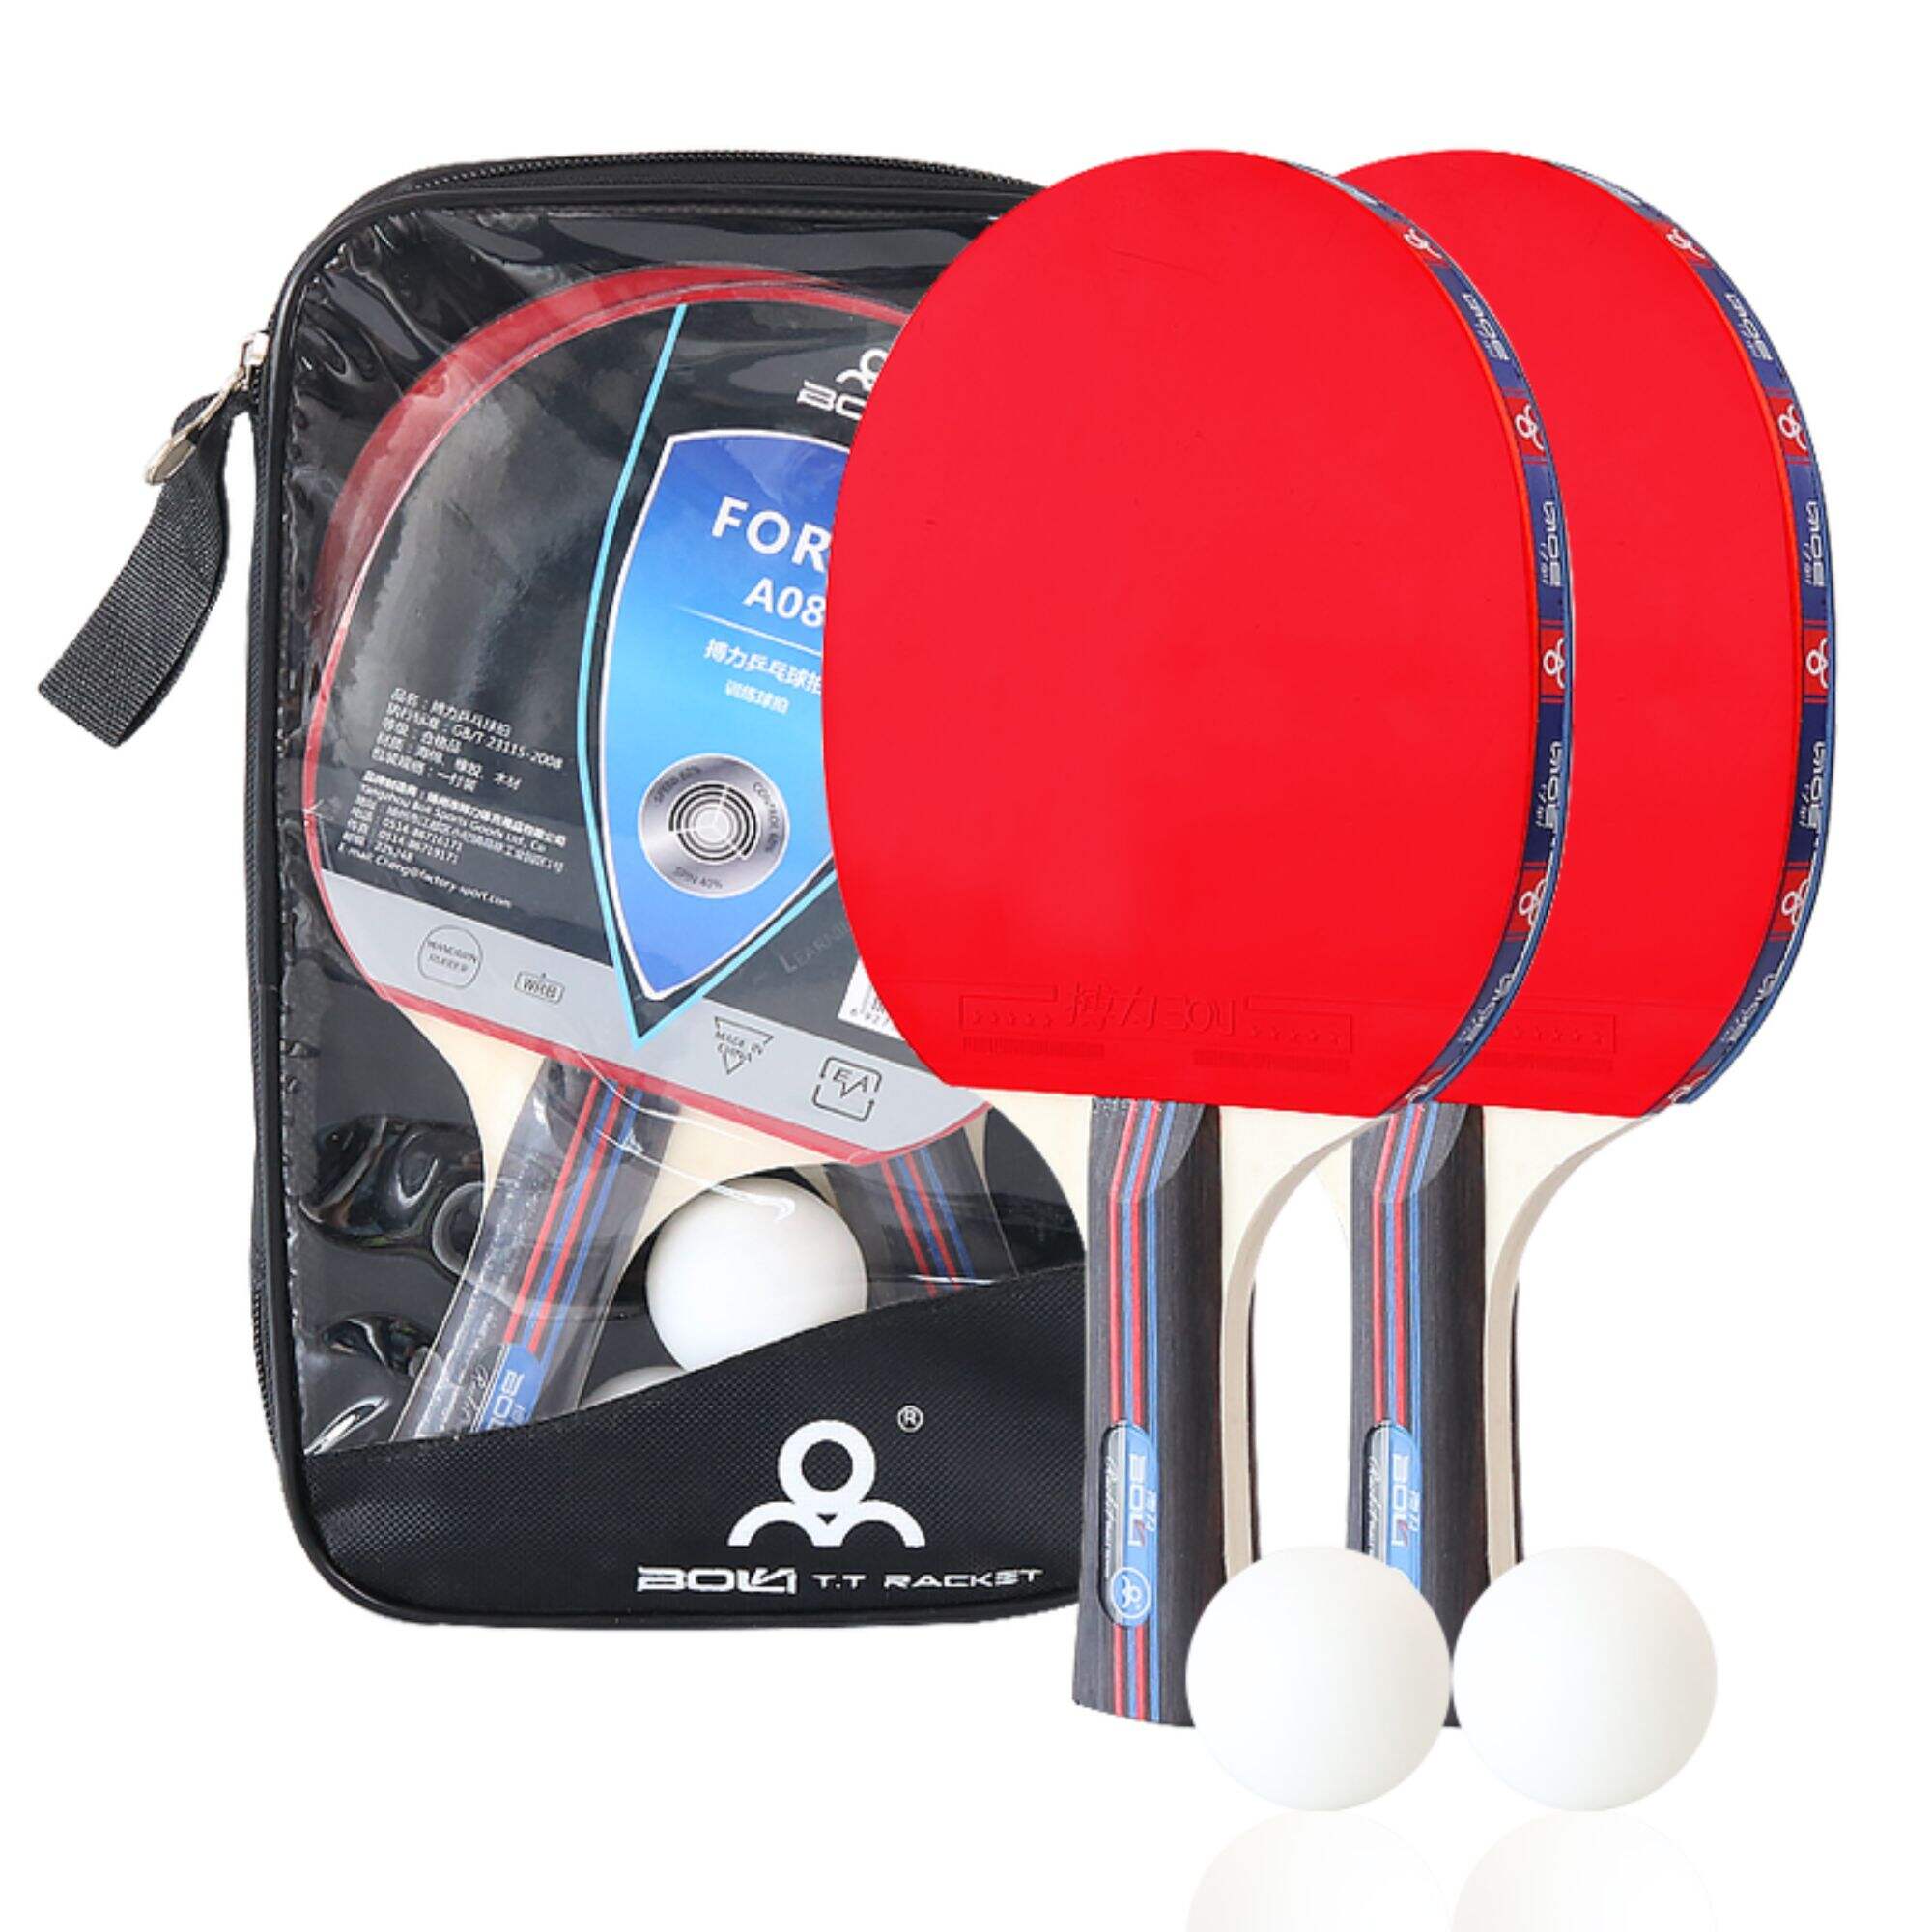 A08 Easy To Use Pingpong Table Tennis Racket Set